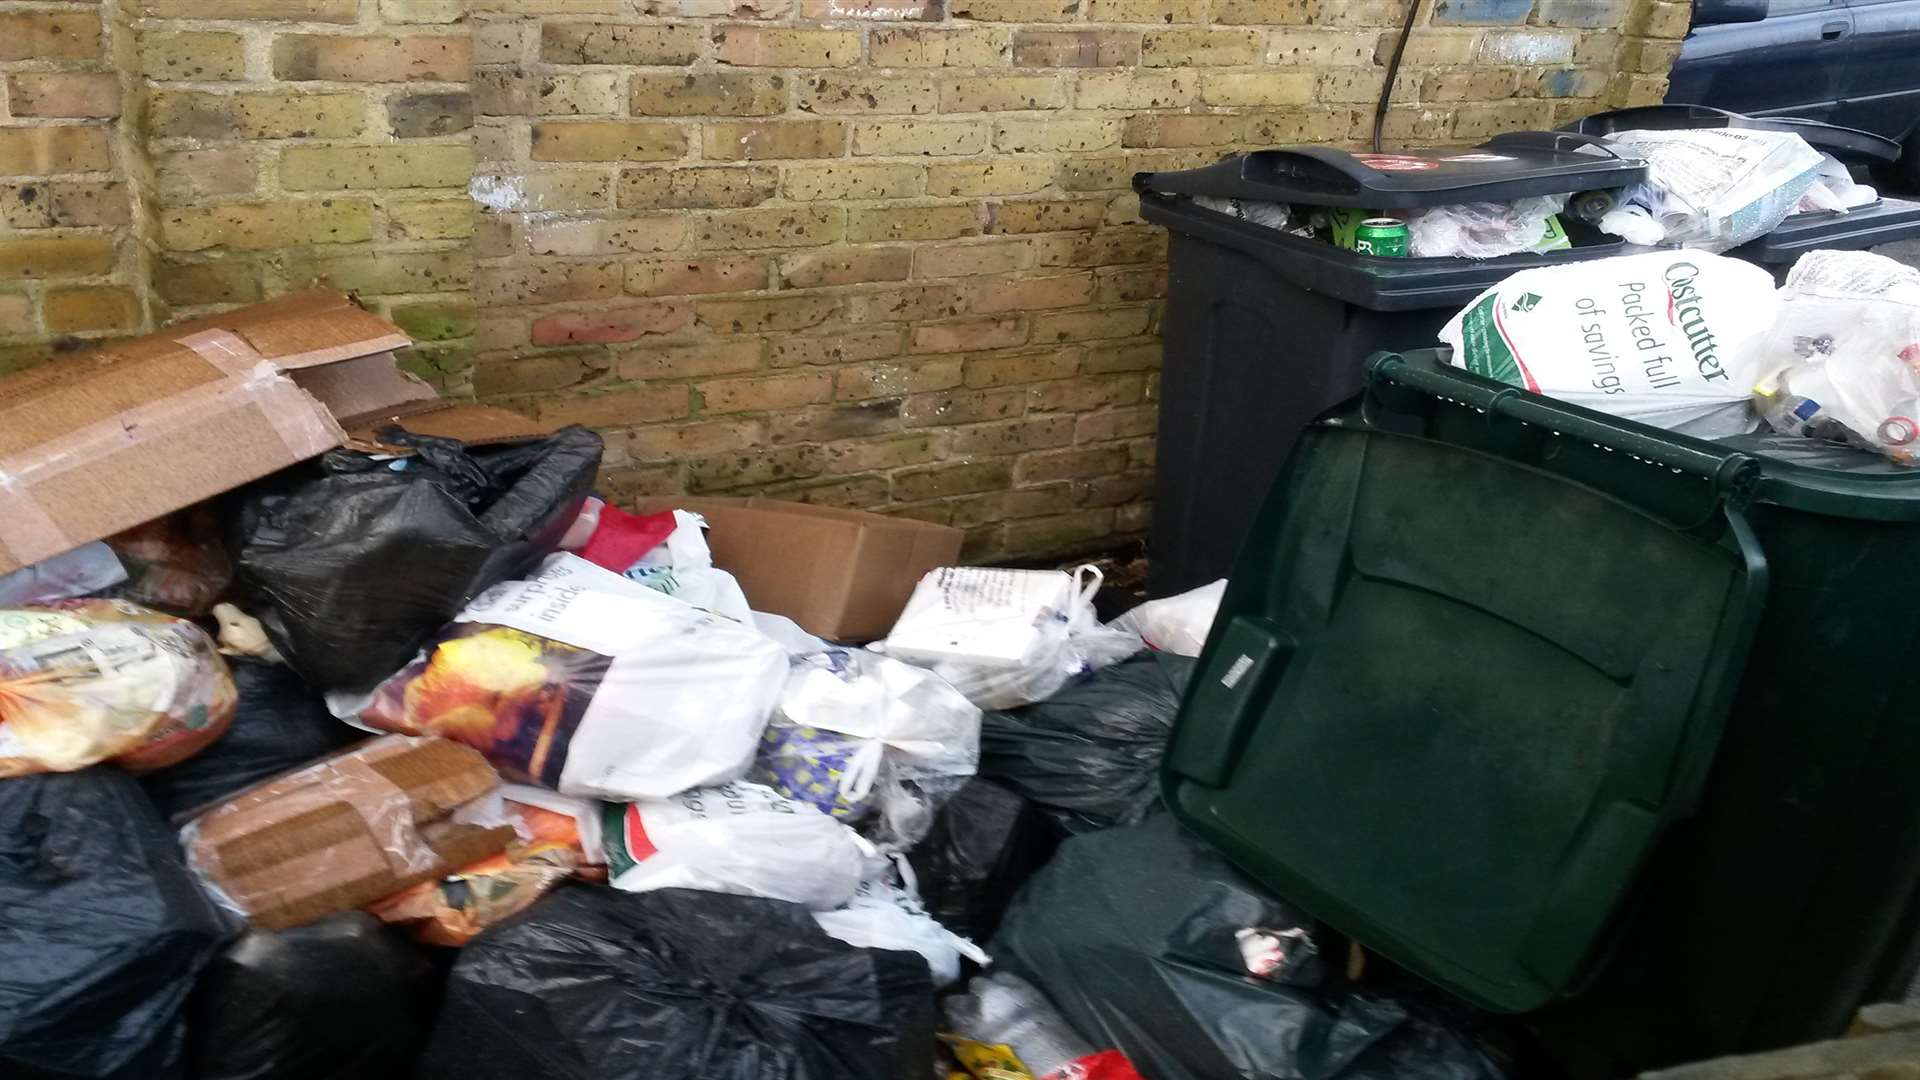 Mr Etherington says HMOs lead to litter problems and anti-social behaviour